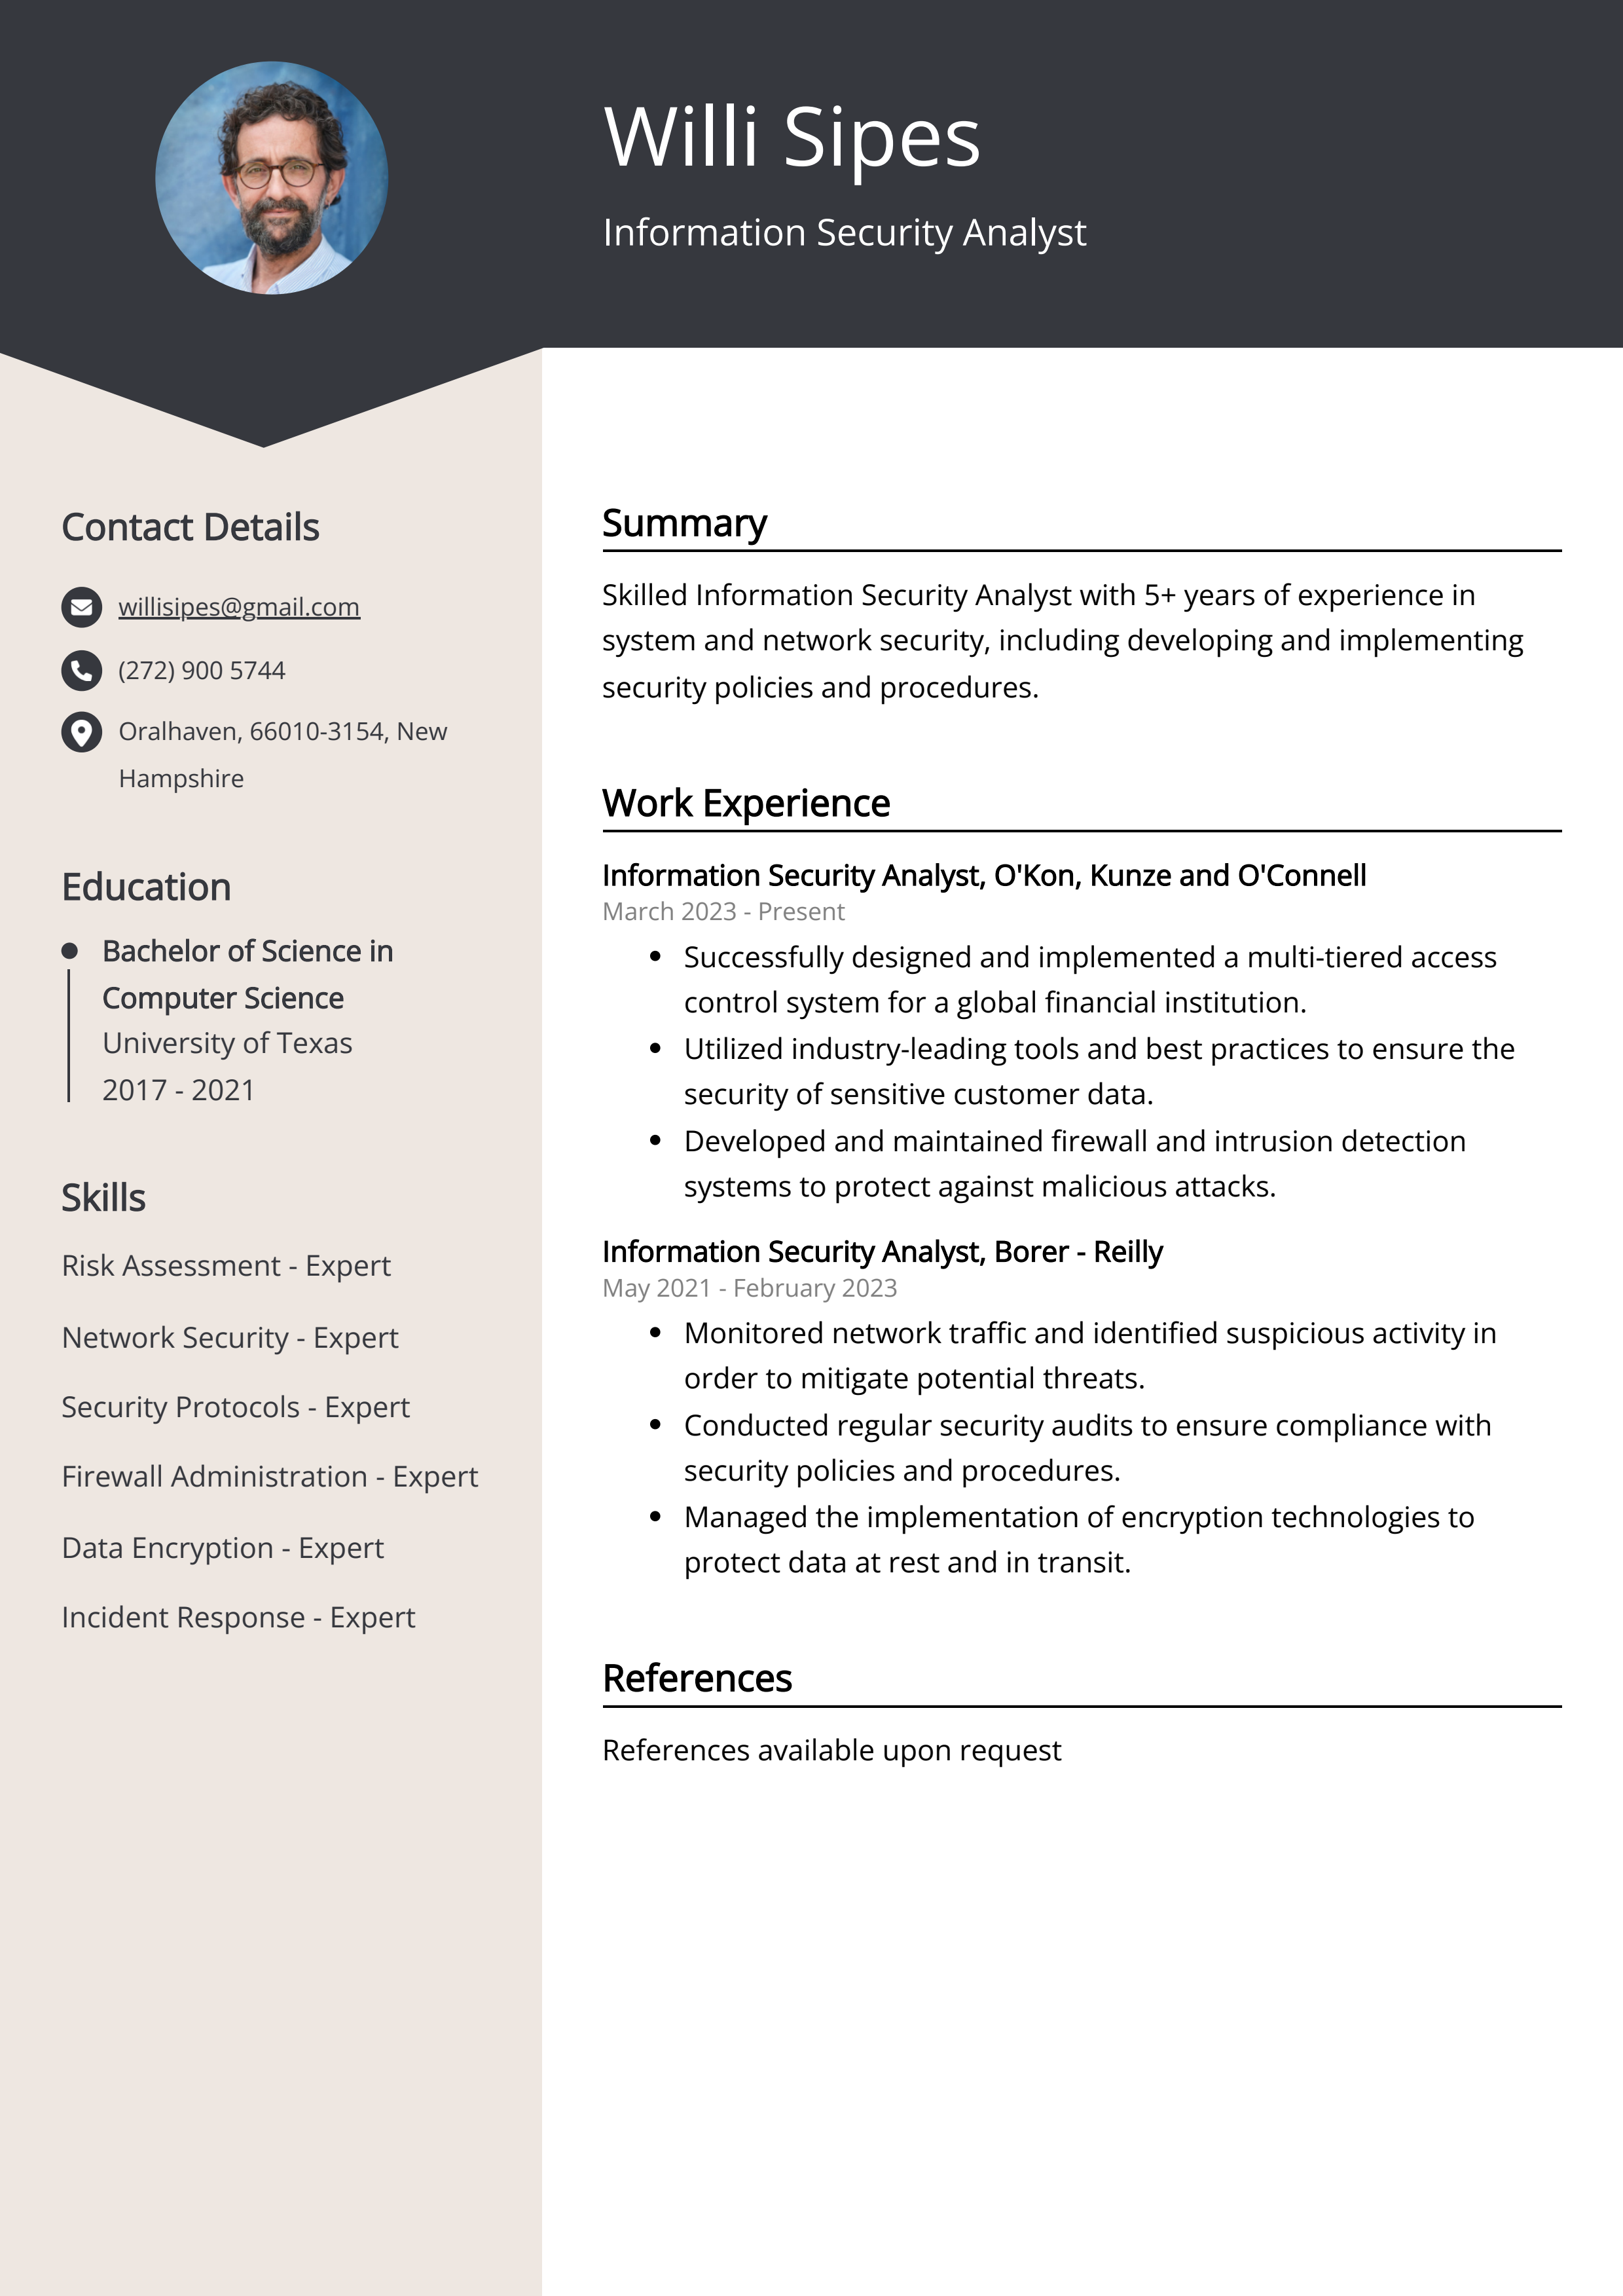 Information Security Analyst CV Example